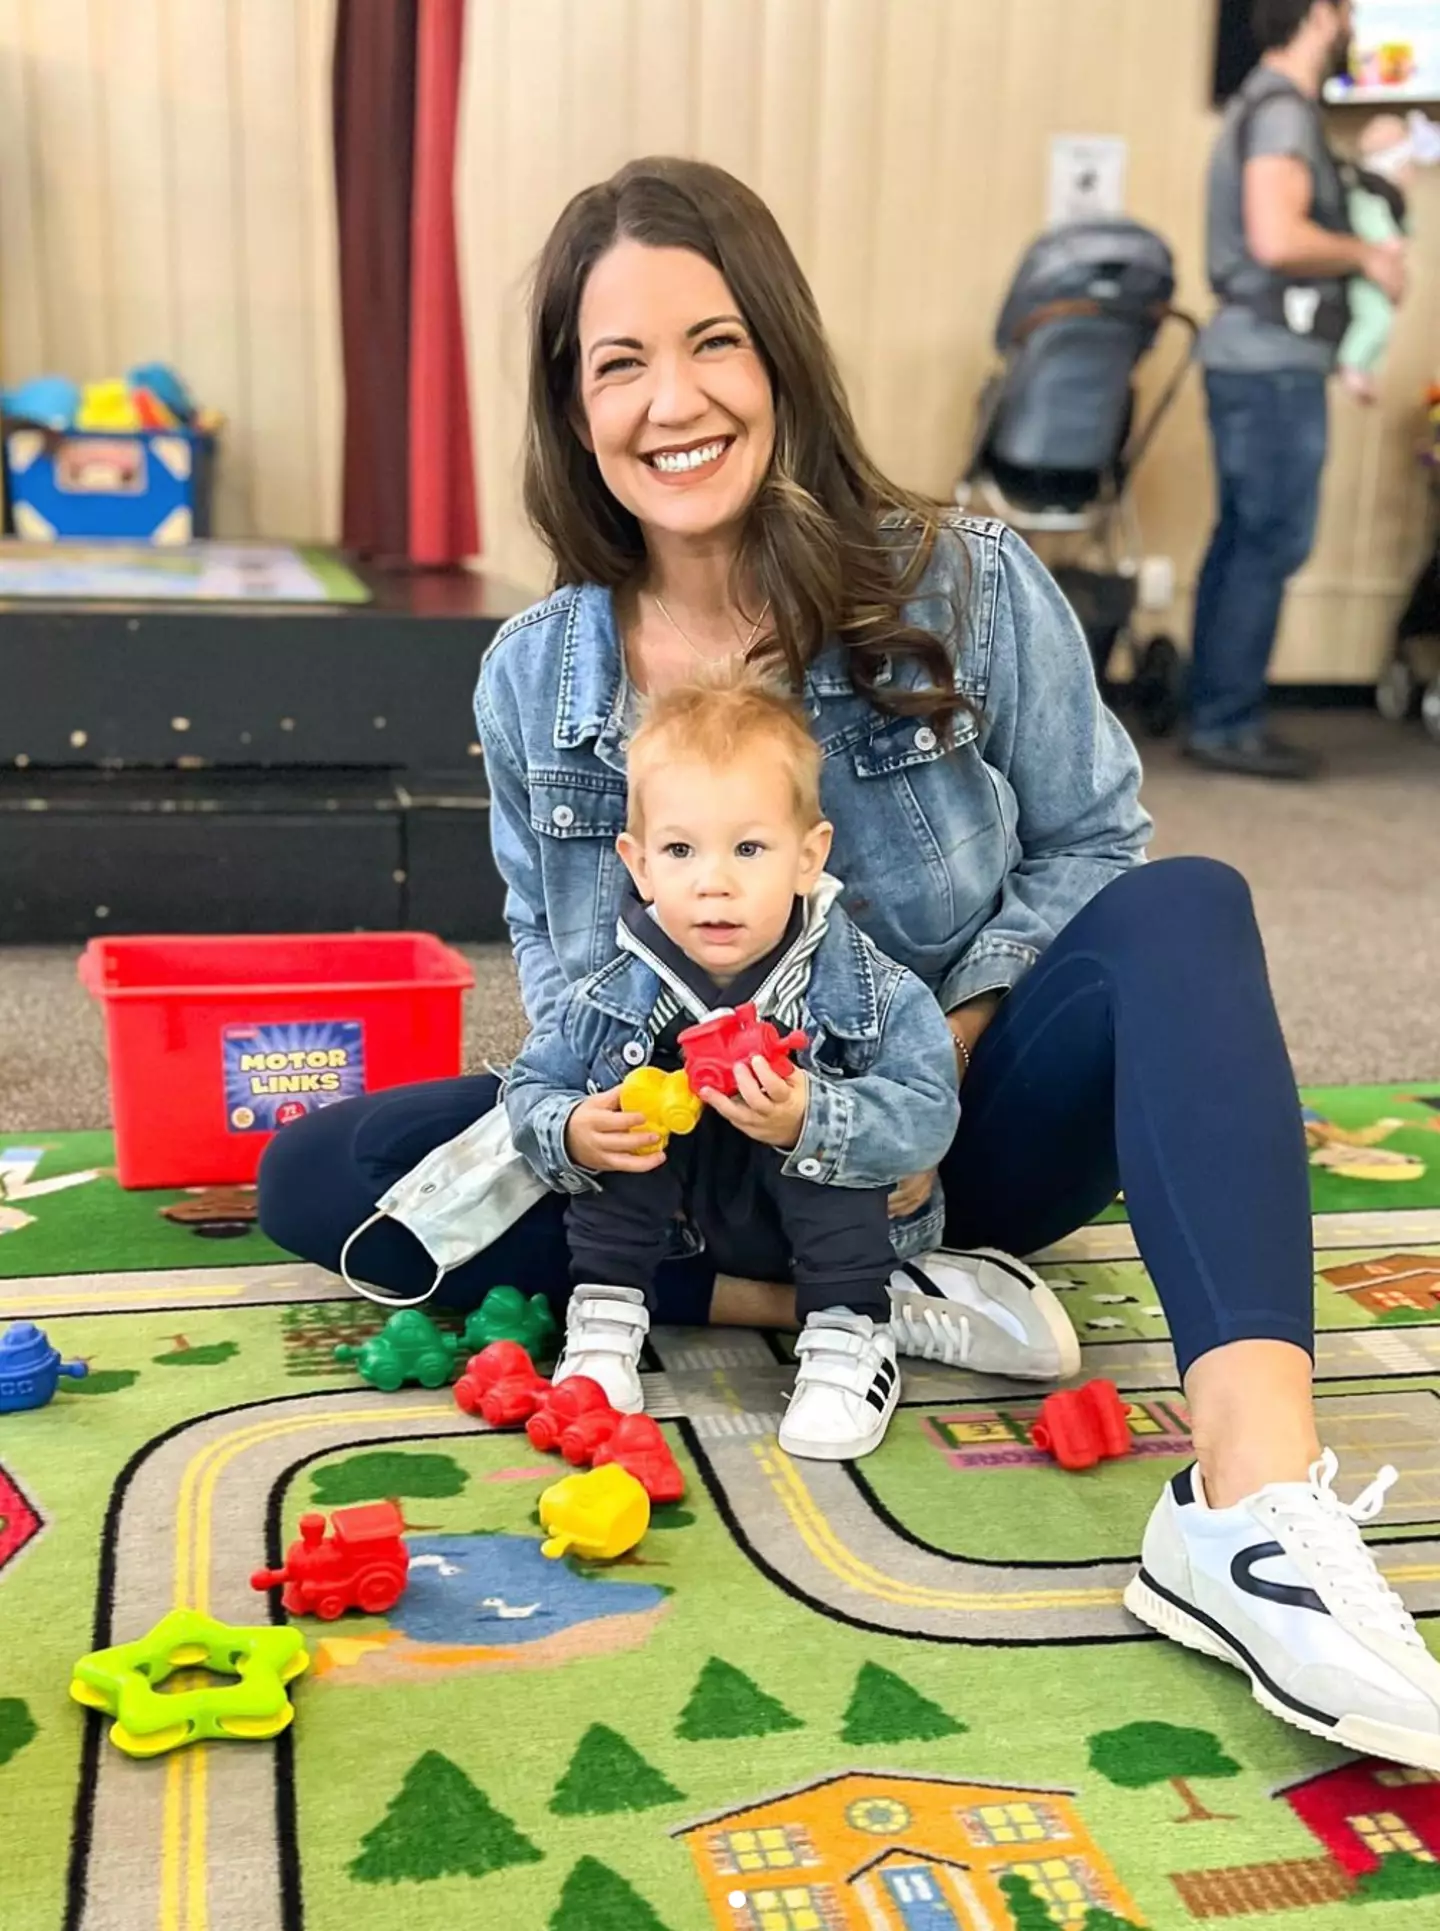 Dani shares pictures with her Son Rhett online (